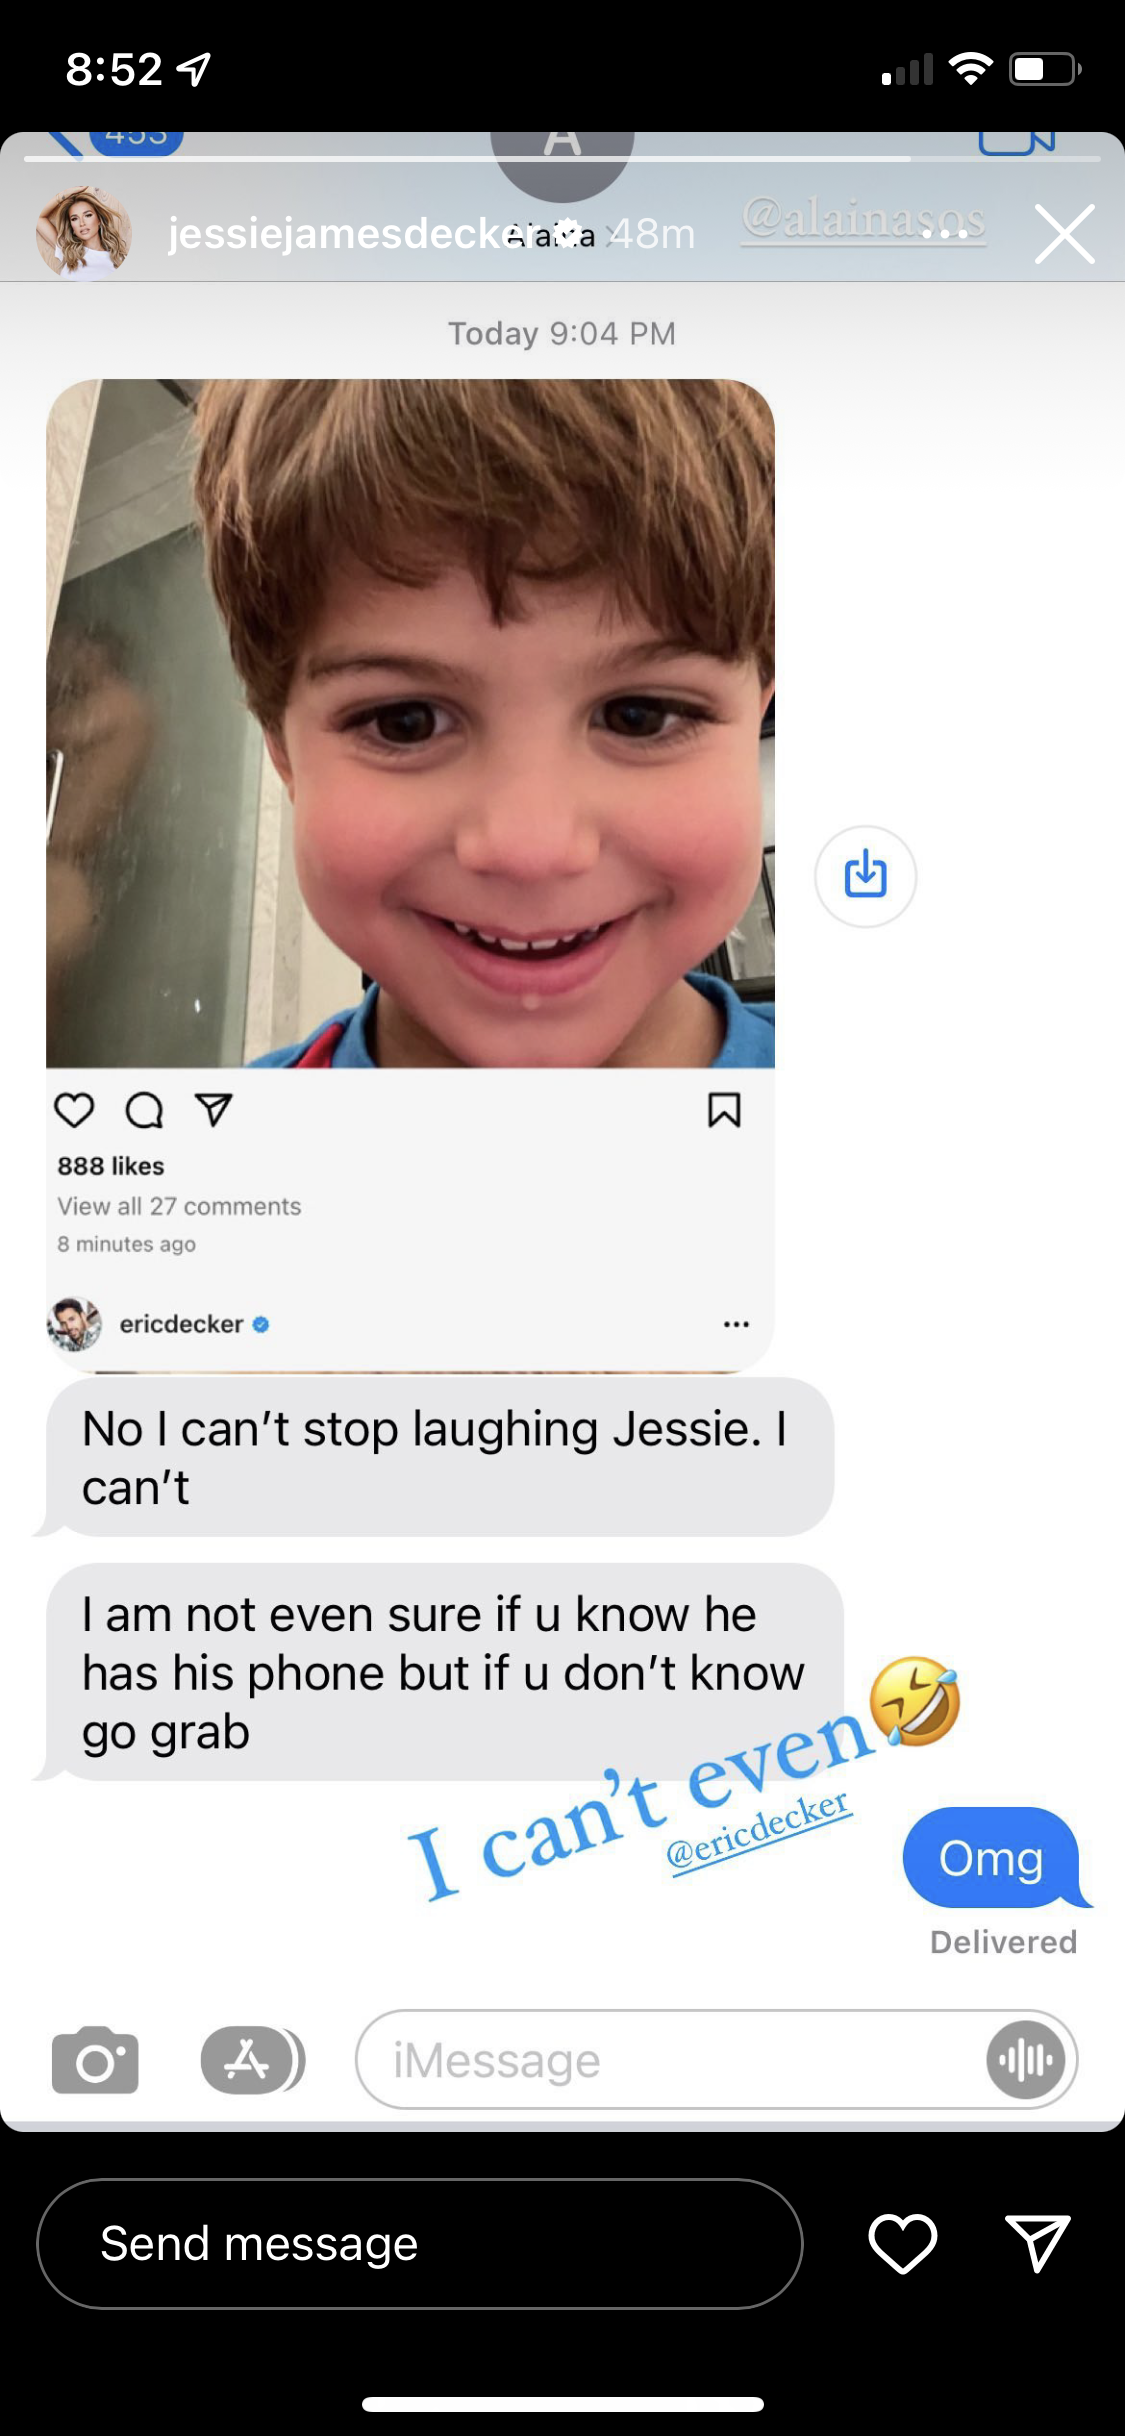 Jessie James Decker's 4-year-old son, Forrest, was up to no good when he accidentally snapped a photo of his dad, Eric Decker, taking a shower and posting it on Instagram. (Credit: Jessie James Decker / Instagram) 